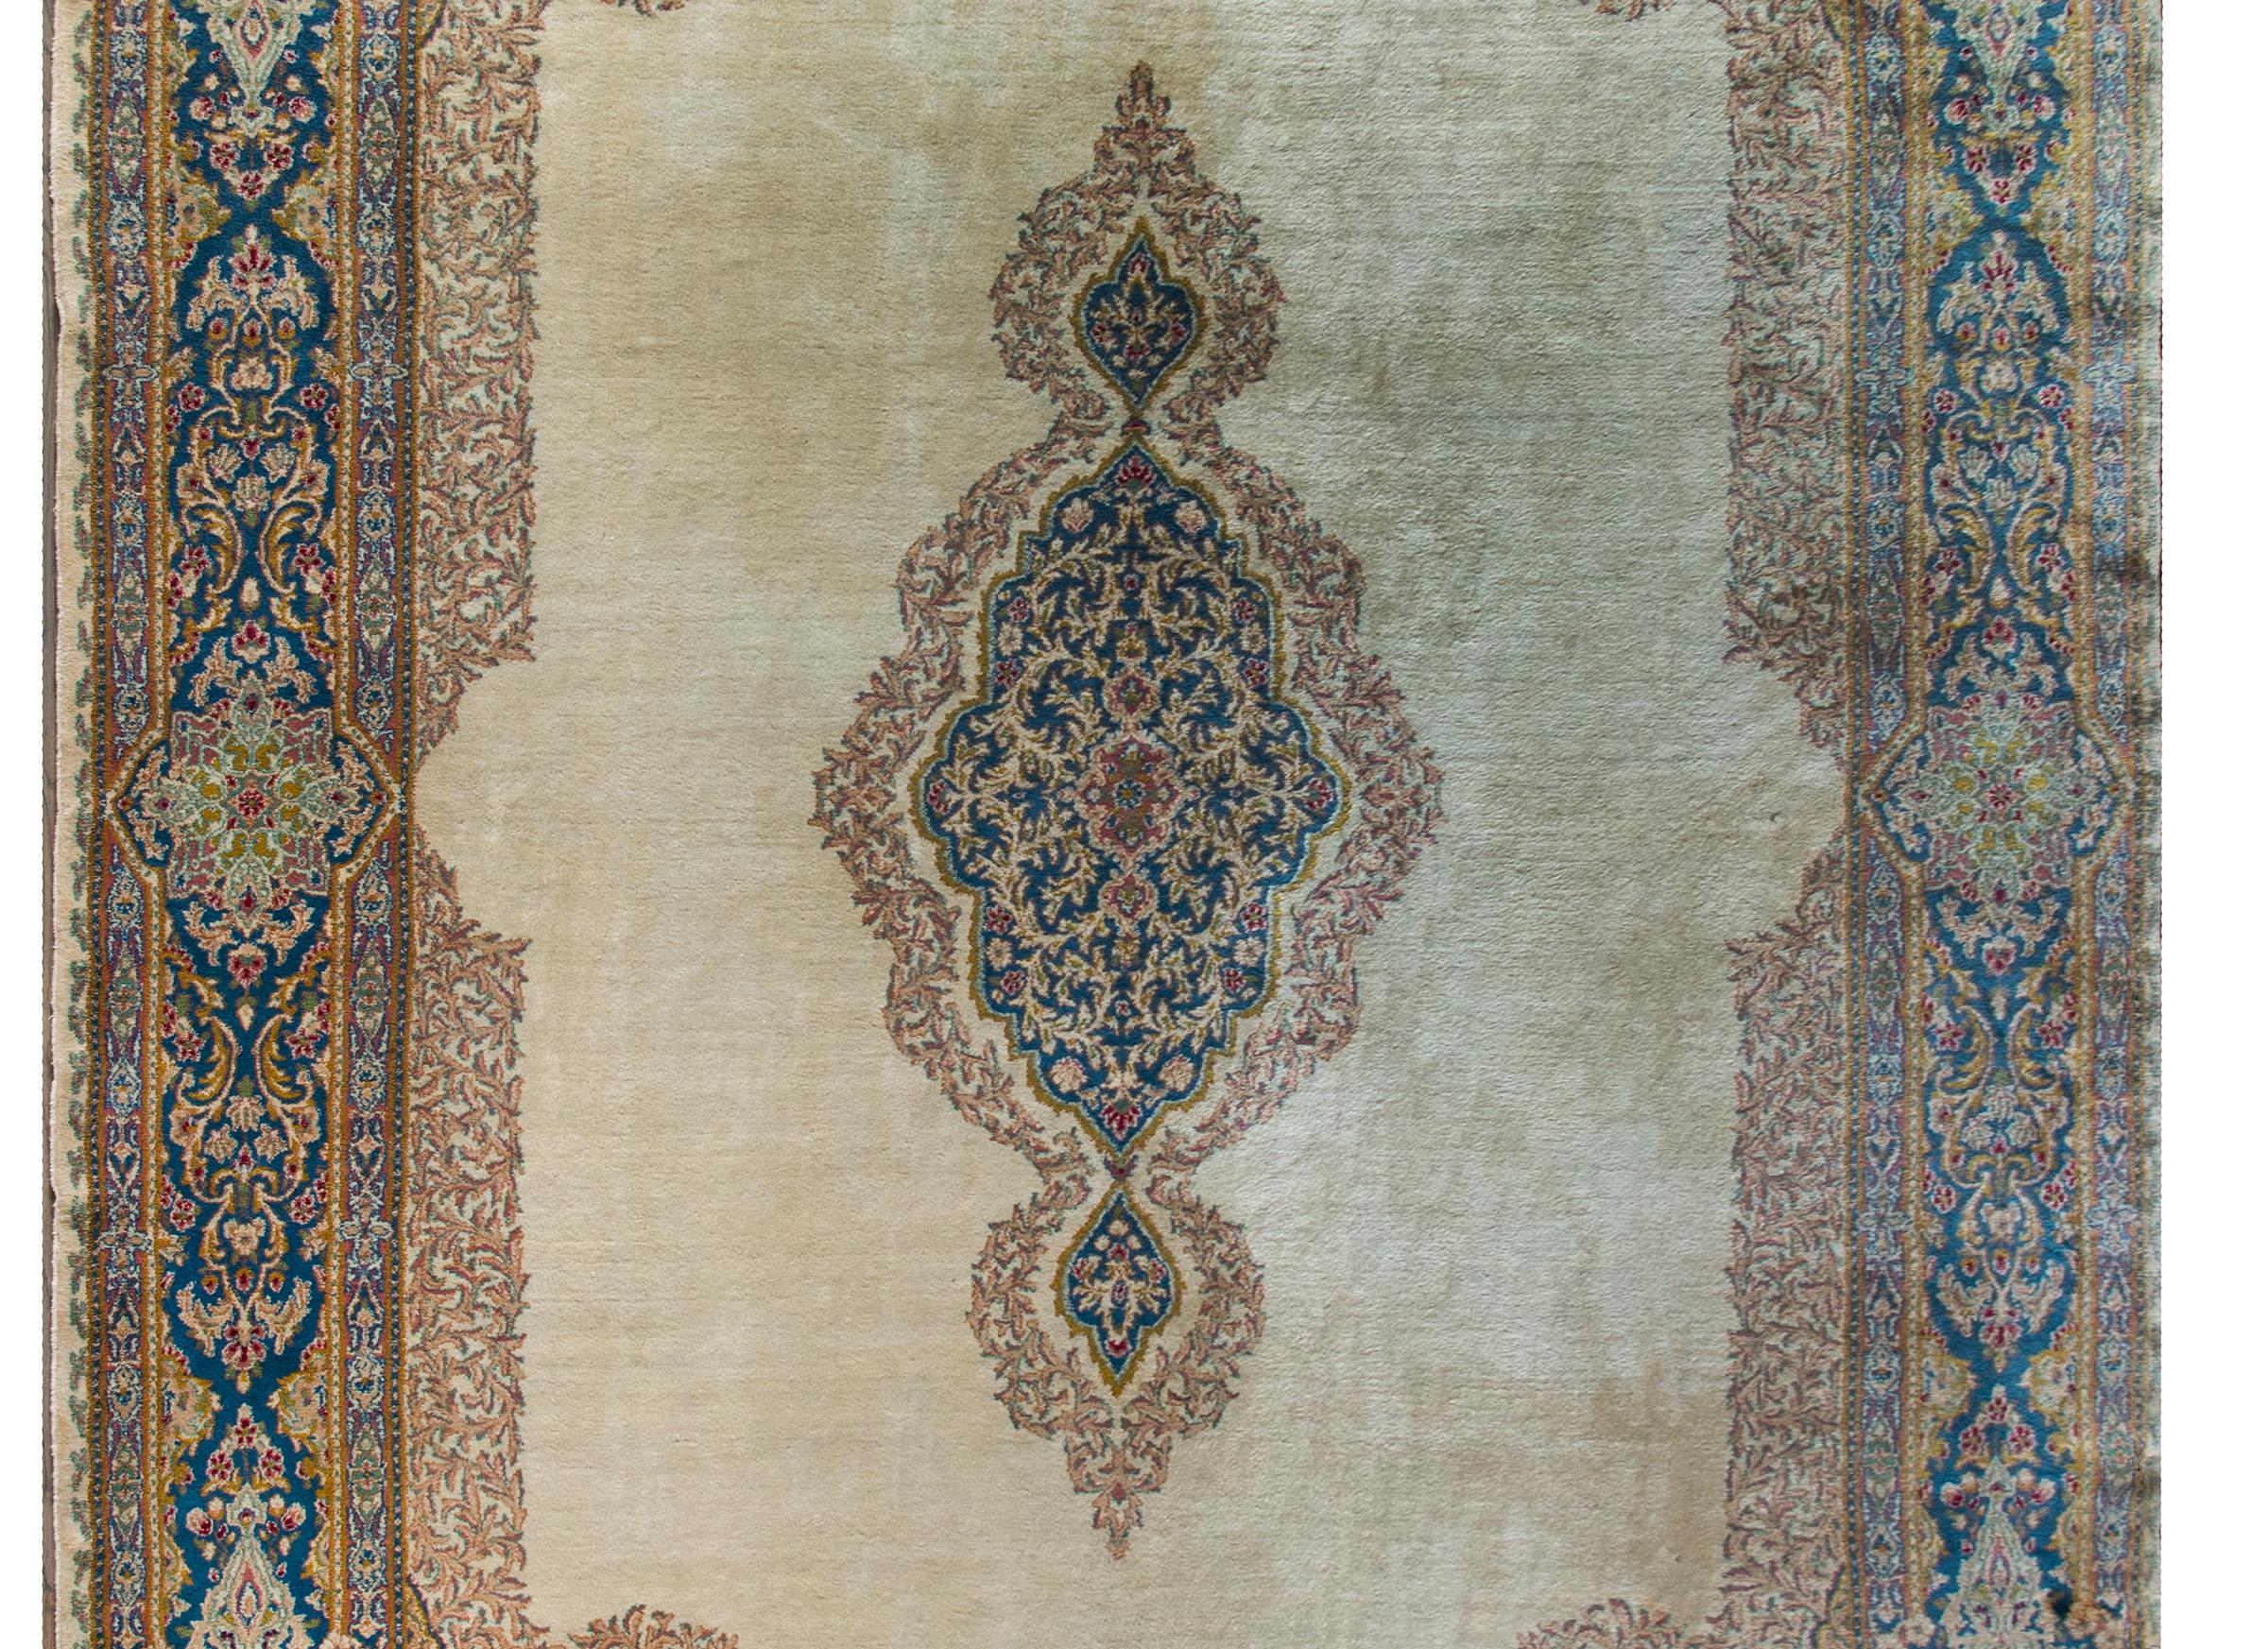 A beautiful early 20th century Persian Kirman rug with a wonderful central floral medallion woven in pink, orange, indigo, and cranberry and set against a stunning champagne colored field, and all surrounded by an extraordinary border containing